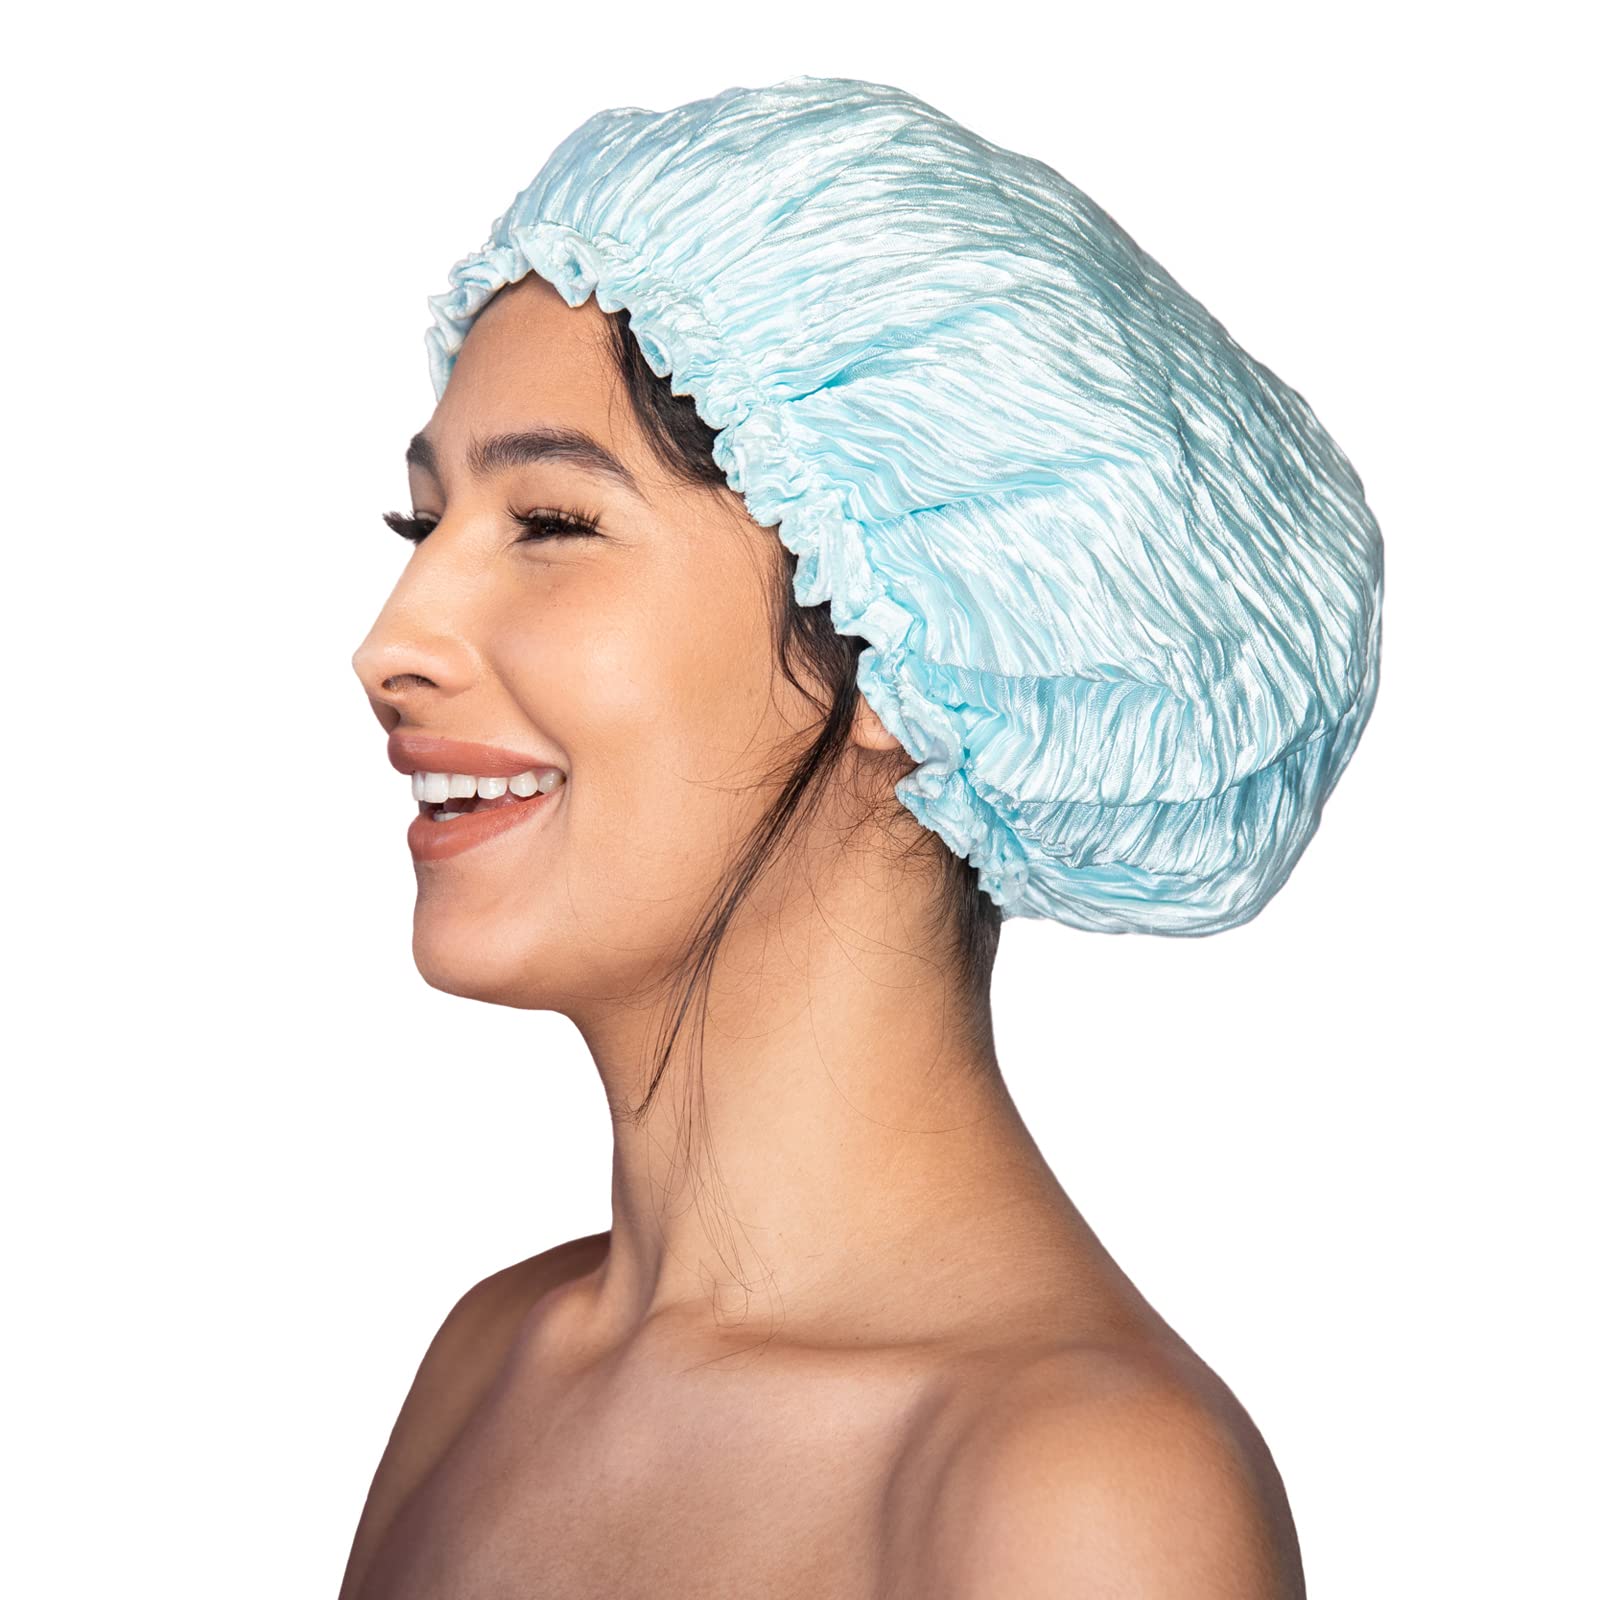 KISMETICS - Crinkled Shower Cap, Large & Reusable Double Layer Shower Cap Lined with Waterproof Material, Pleated Fabric with Ruffle Trim, Large Size for All Hair Lengths (Blue)